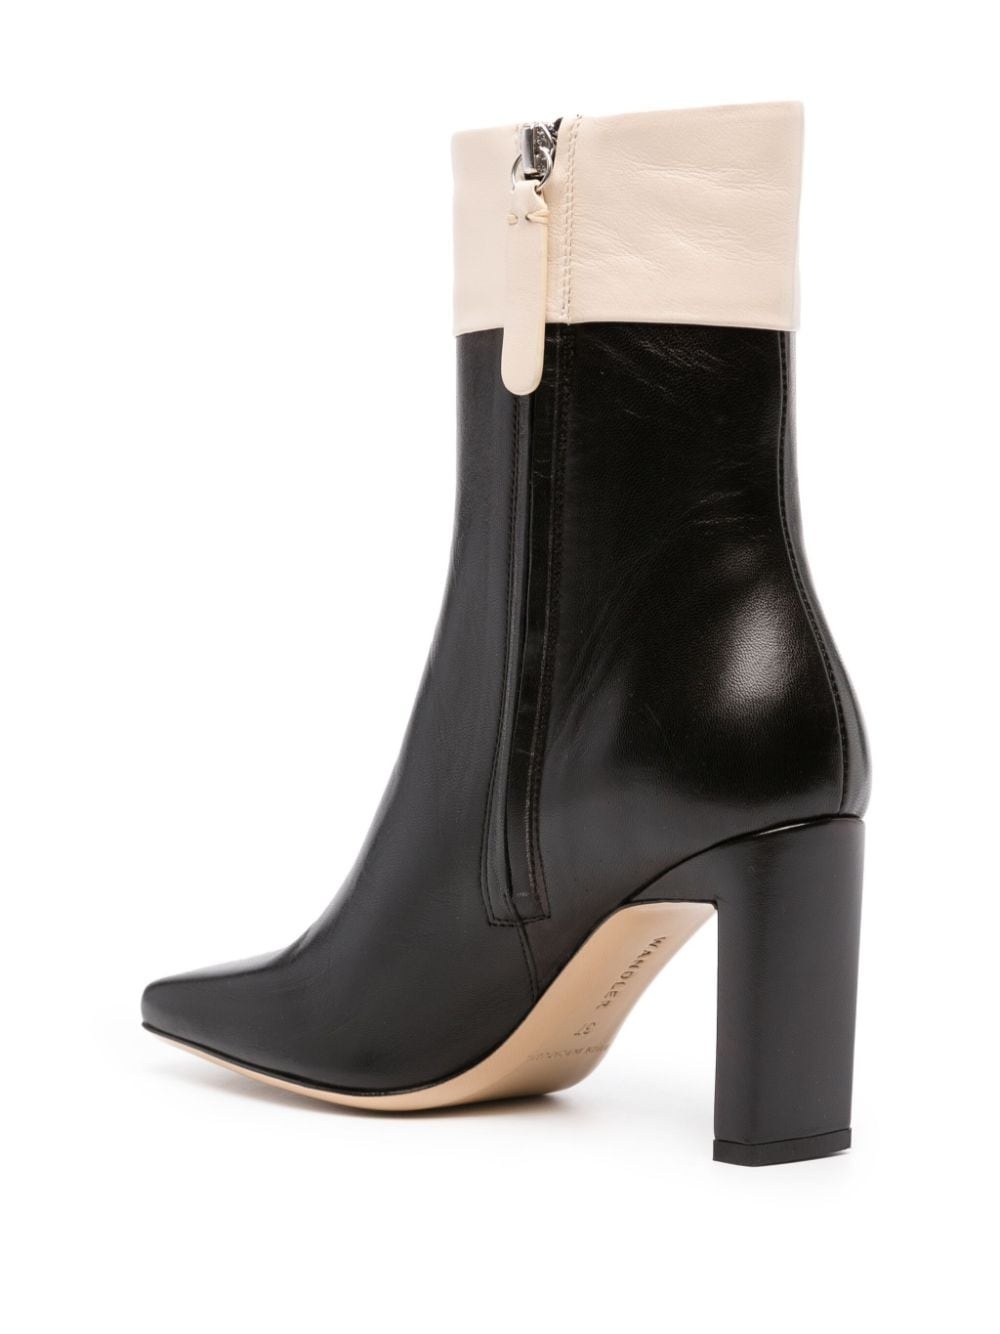 Isa 85mm leather ankle boots - 3